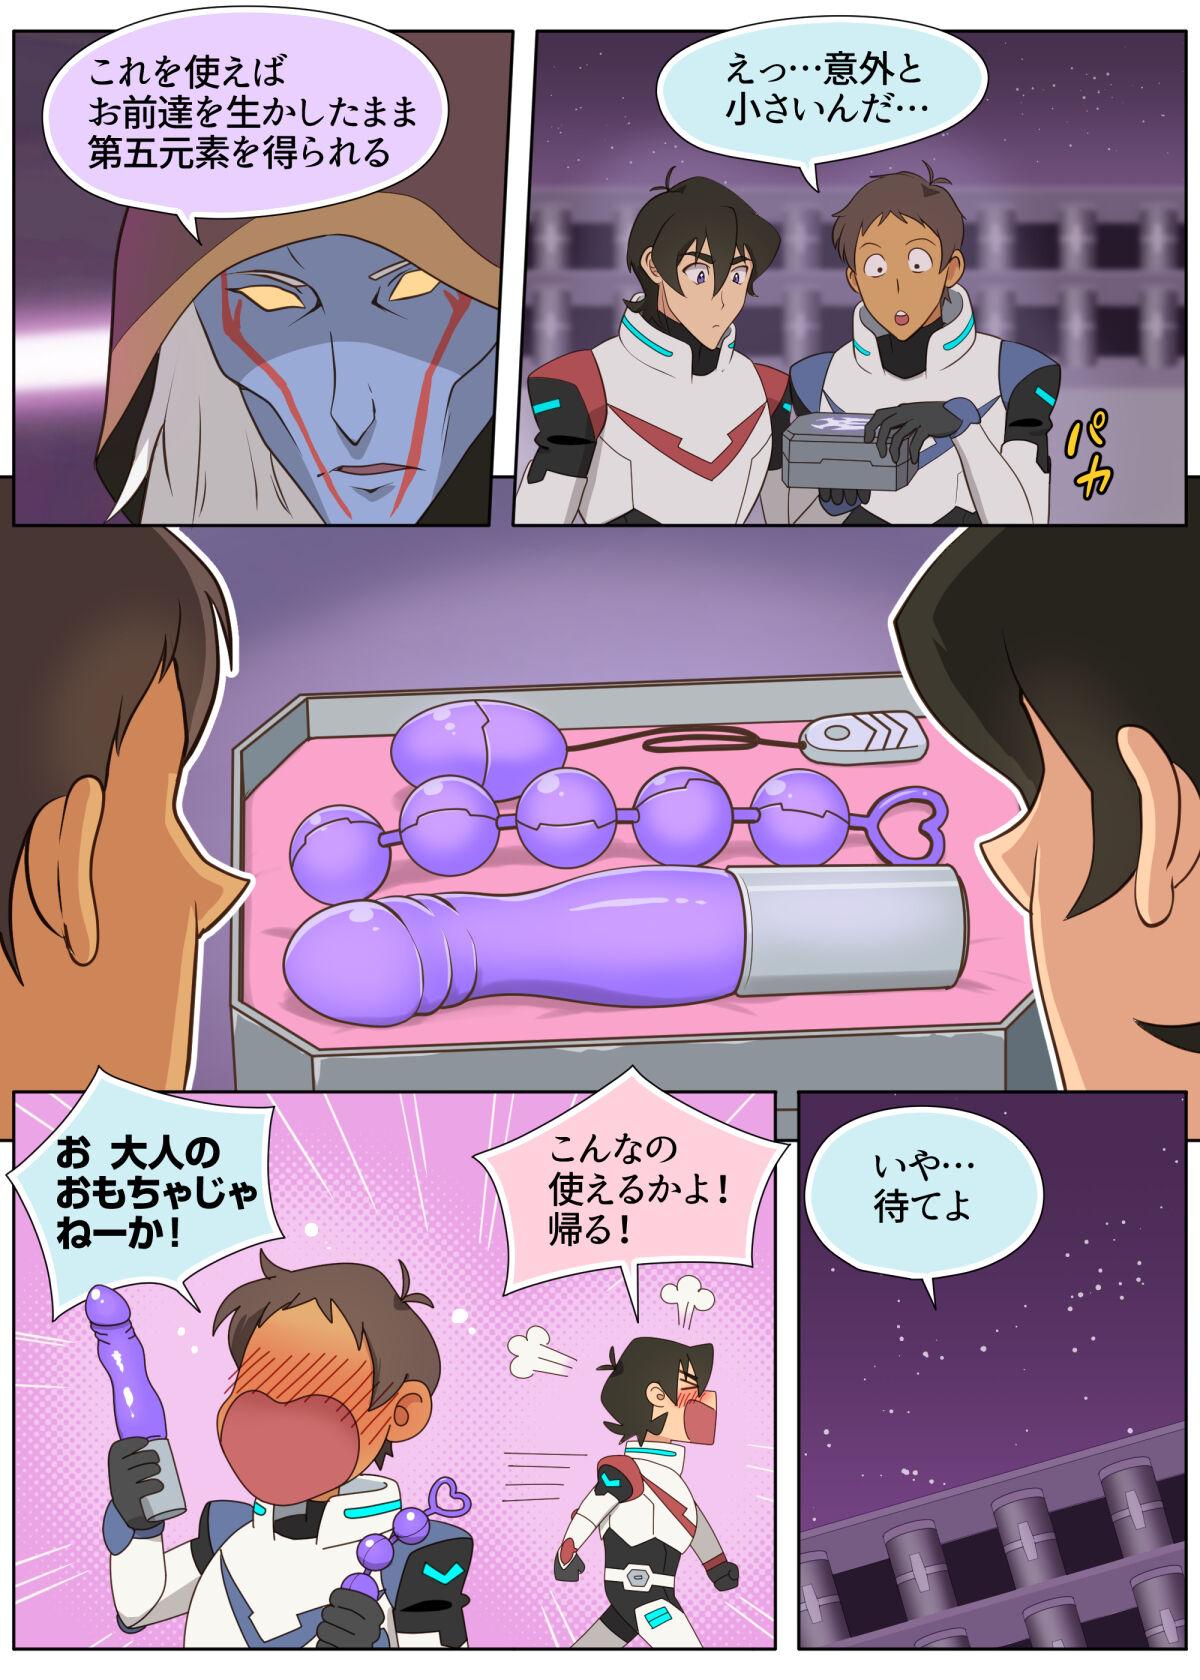 Tits ハガー様のおもちゃ! - Voltron Camgirl - Page 6